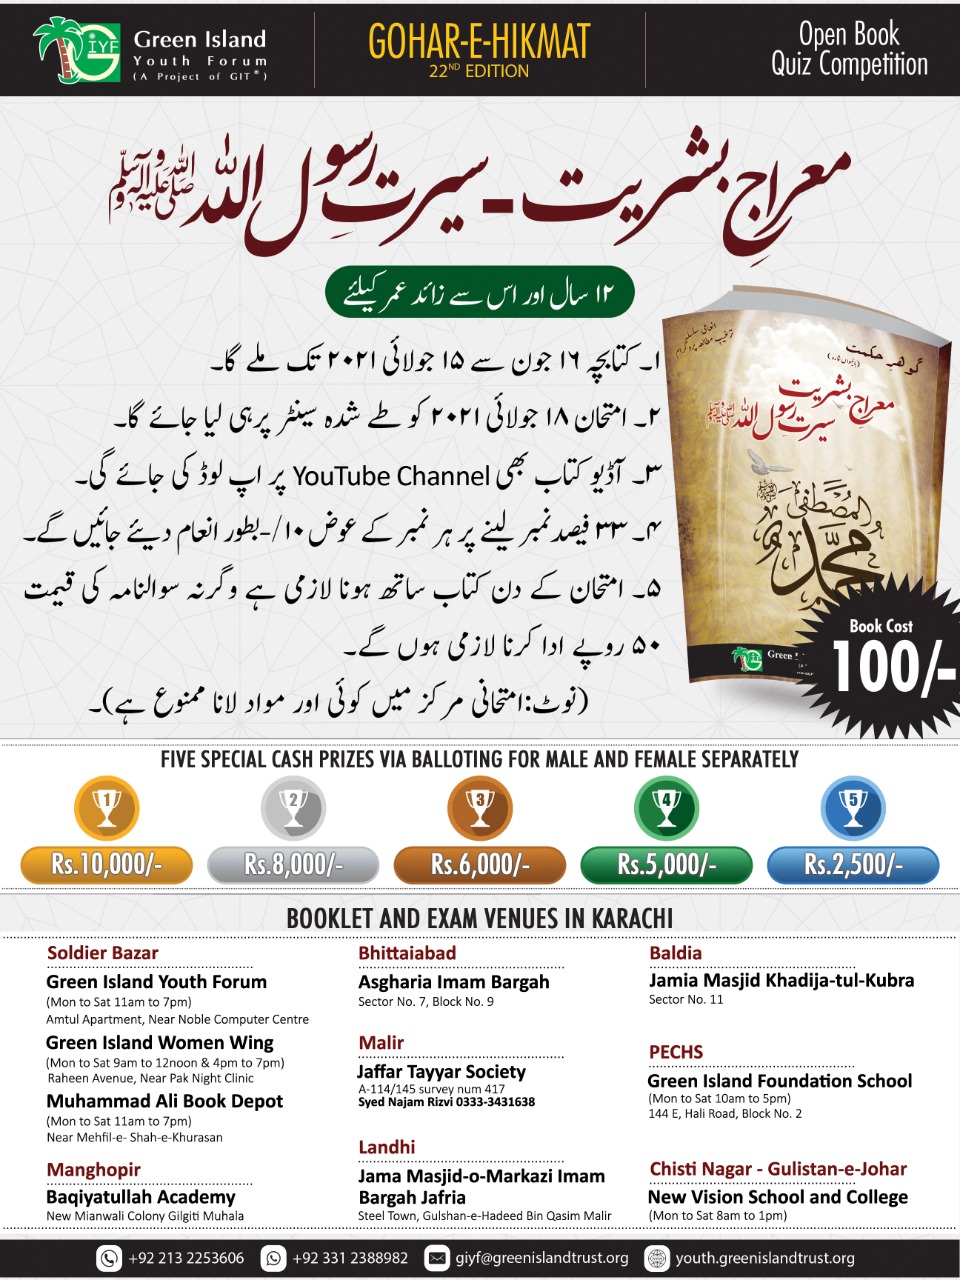 Gohar-e-Hikmat – 22nd Edition (Physical Book Reading Competition)